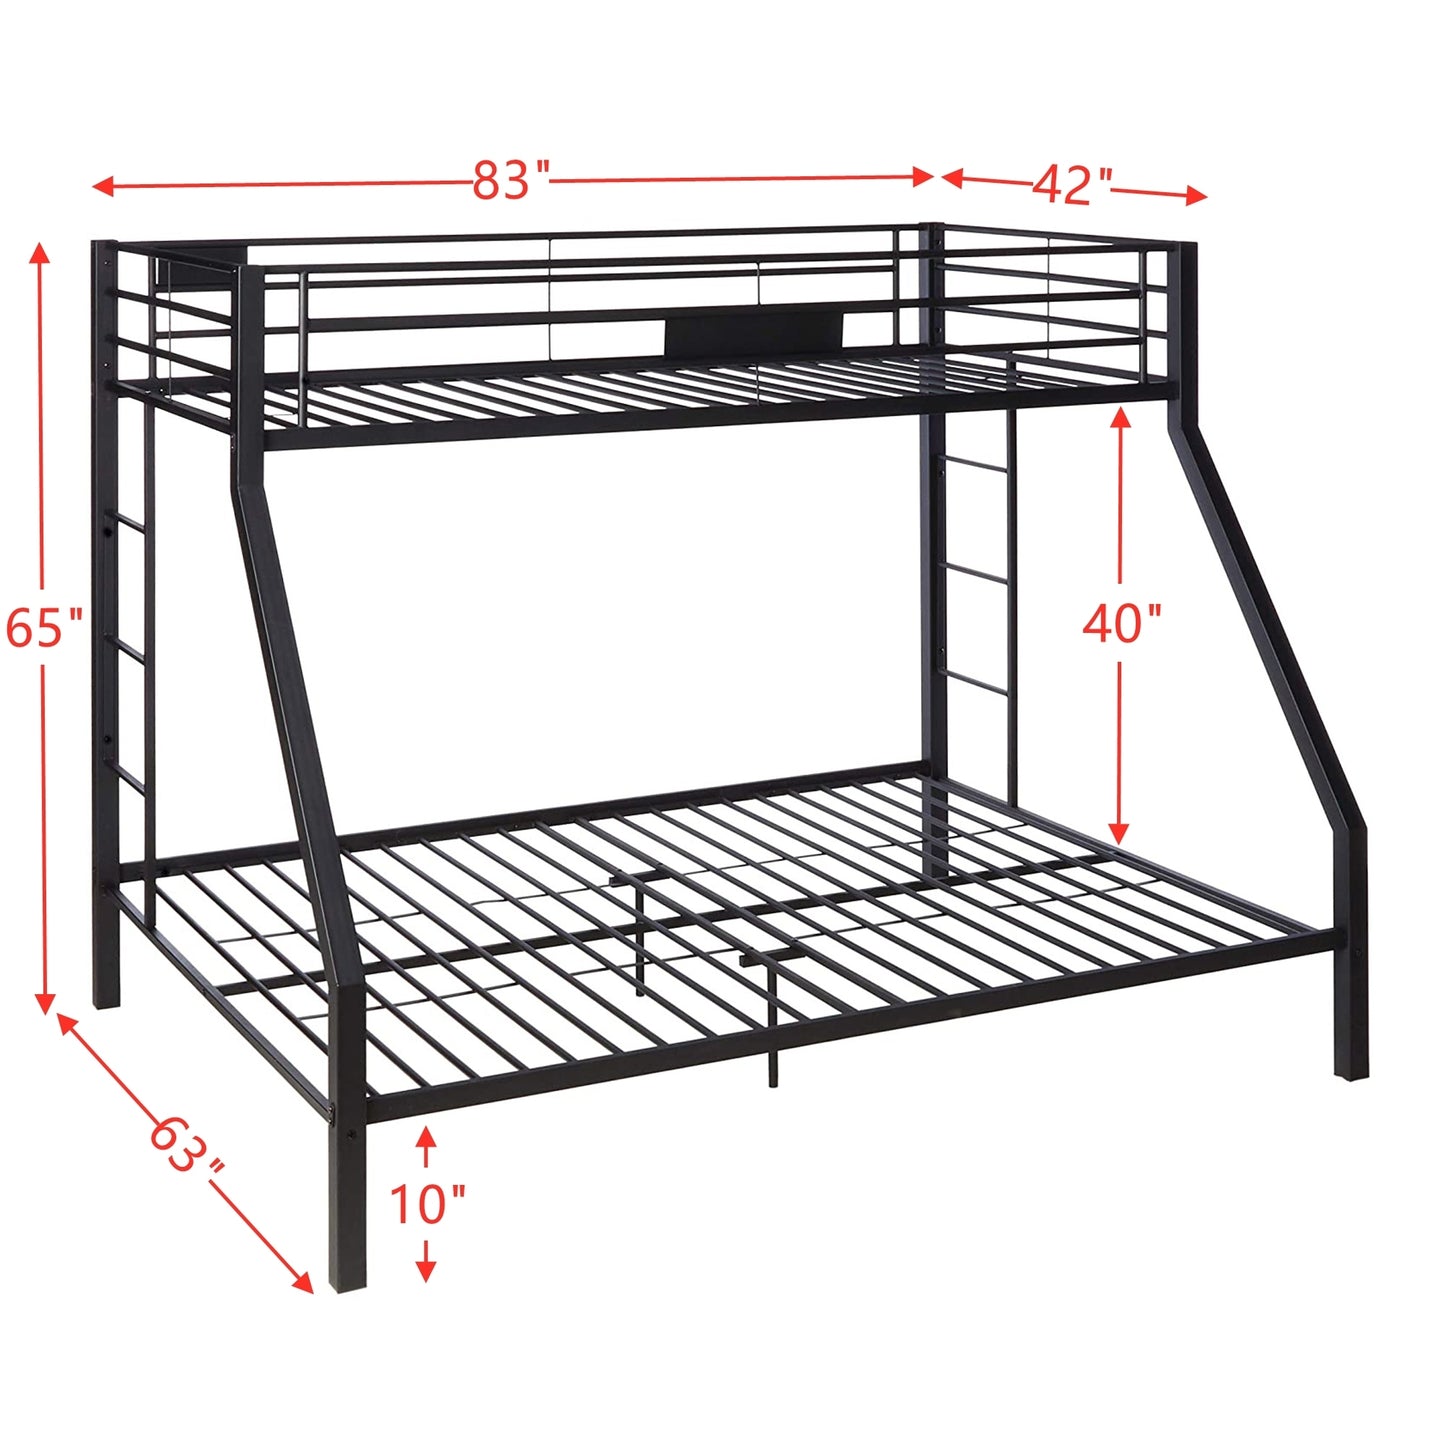 ACME Limbra Bunk Bed (Twin XL/Queen) in Sandy Black 38000